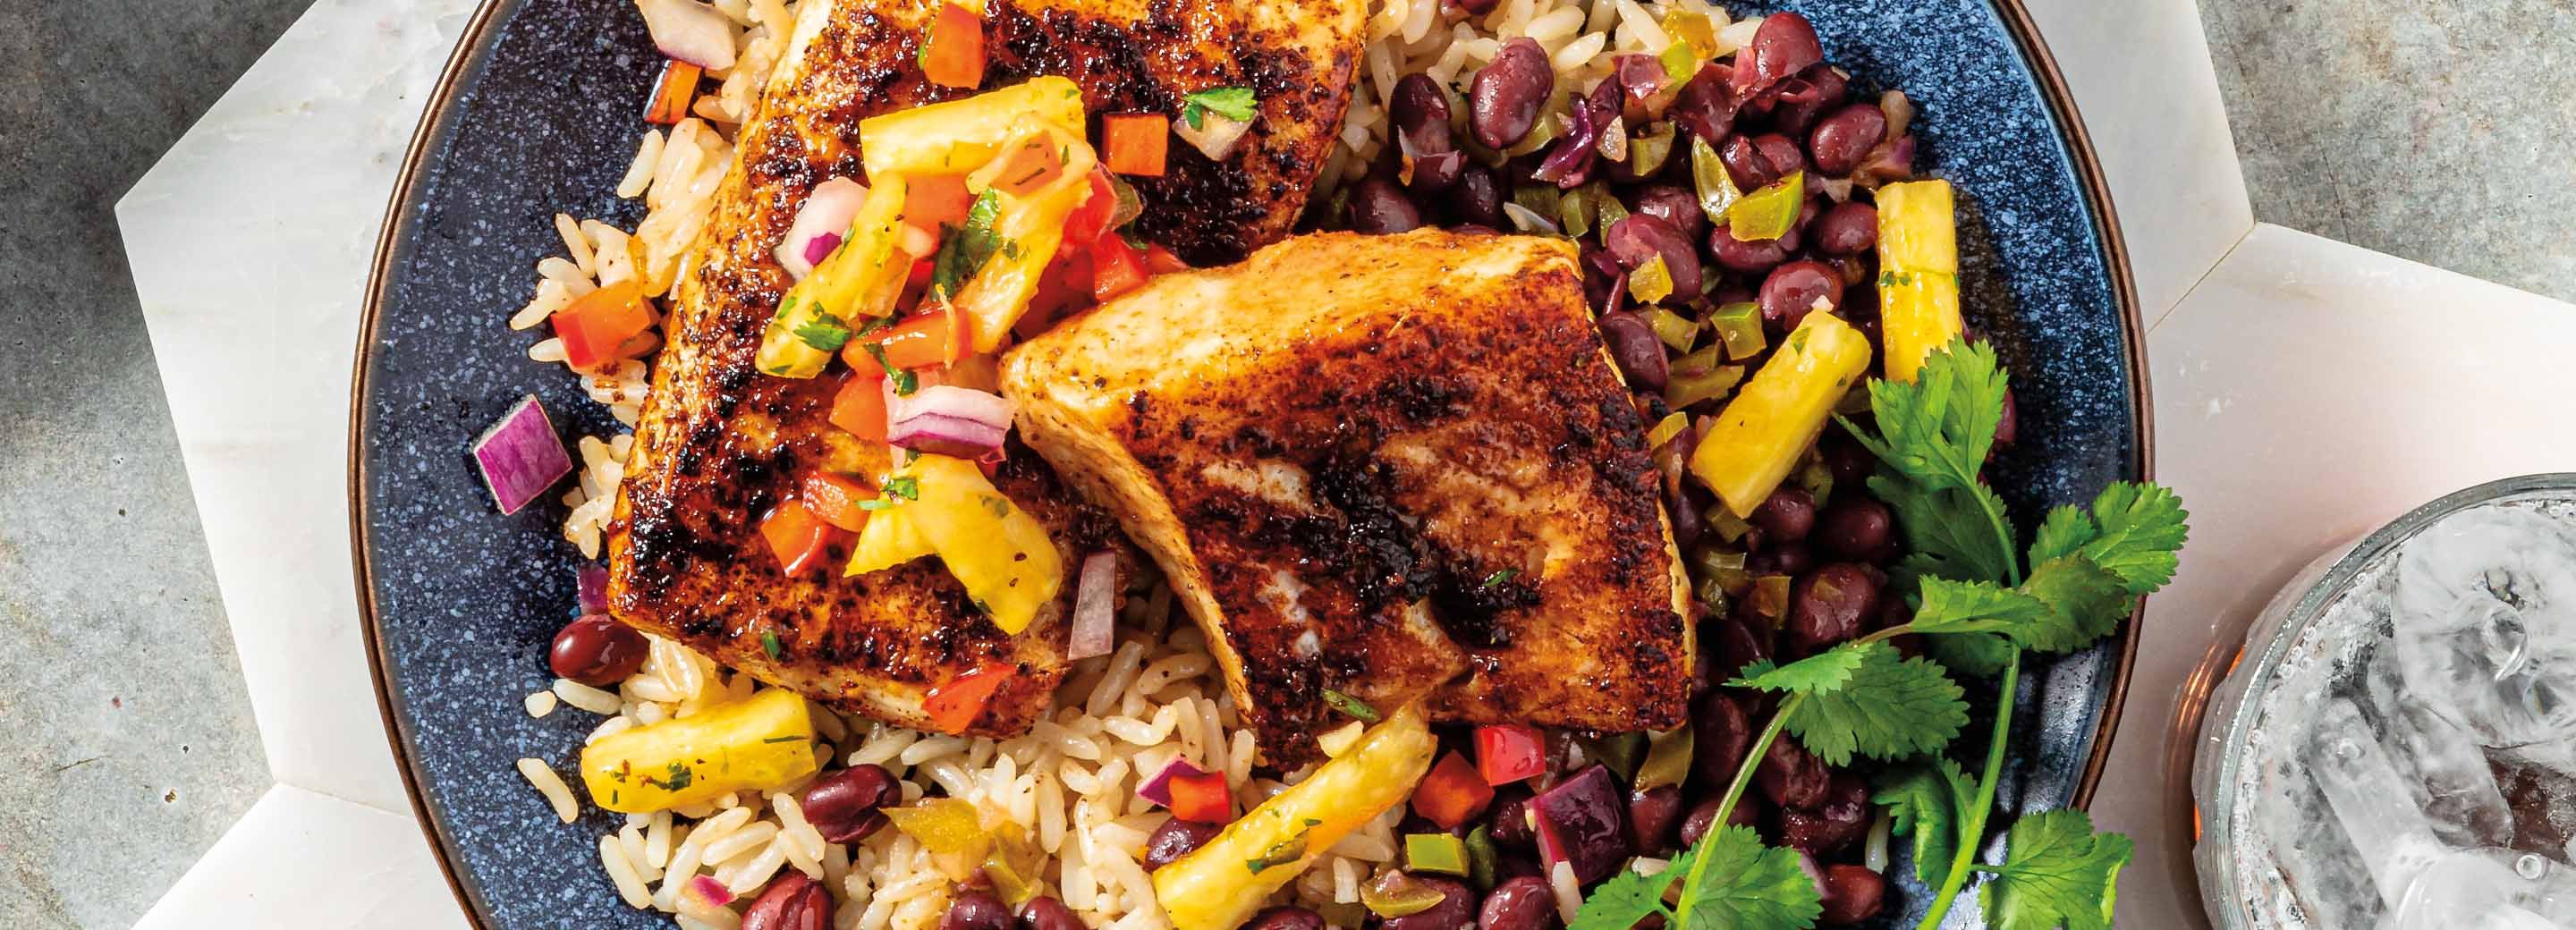 Caribbean-Style Halibut Bowls With Pineapple Salsa